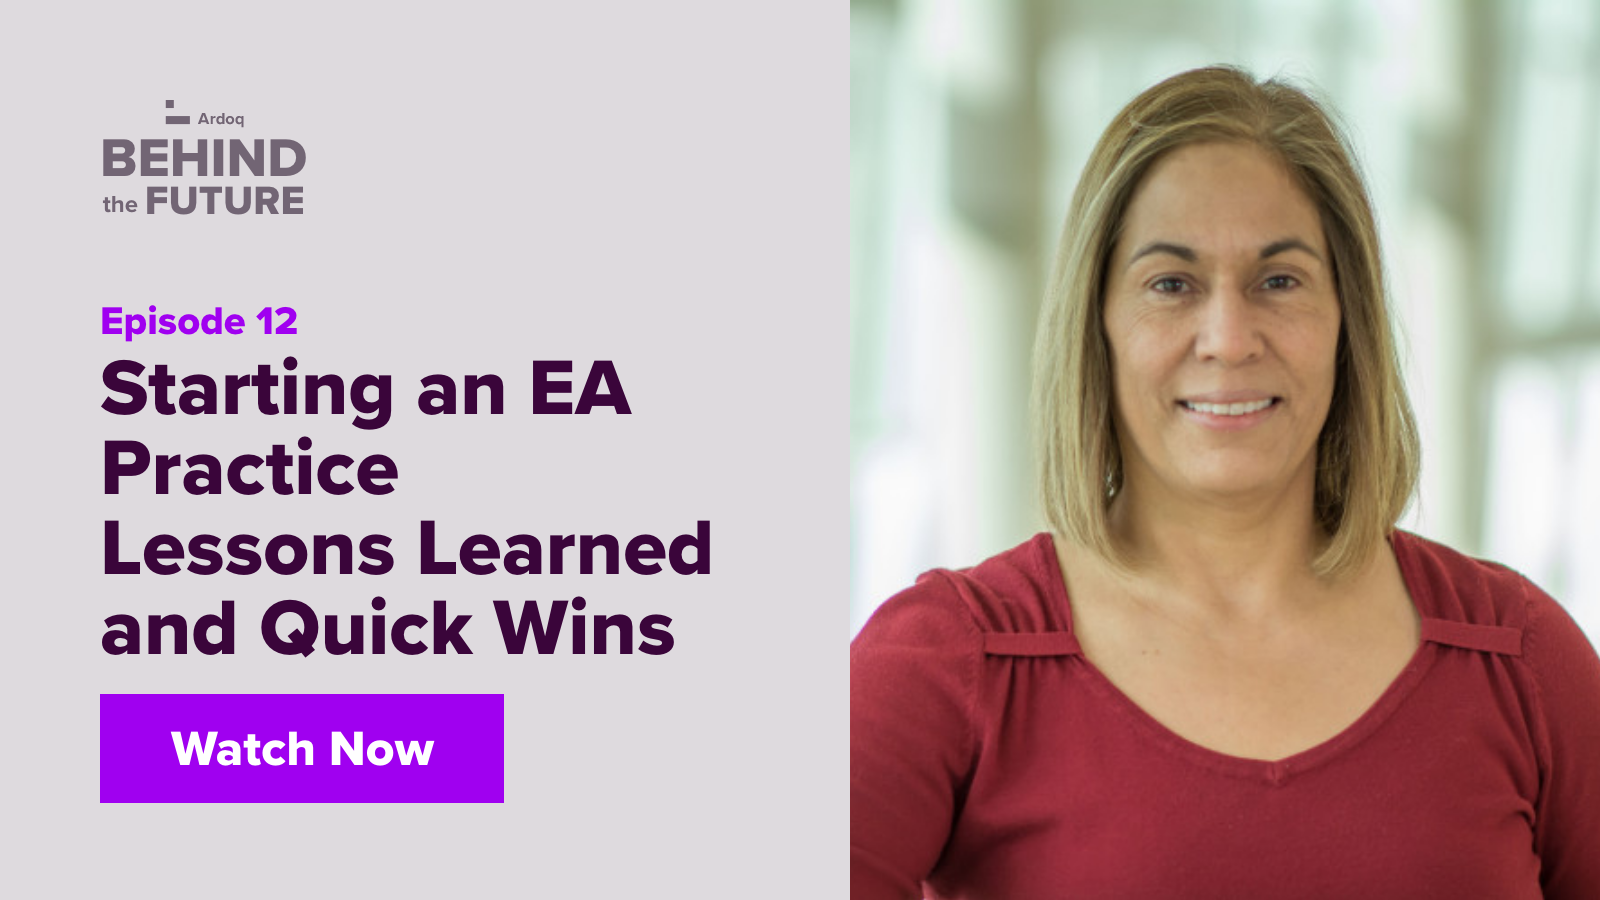 Behind the future 12 starting an ea practice lessons learned and quick wins